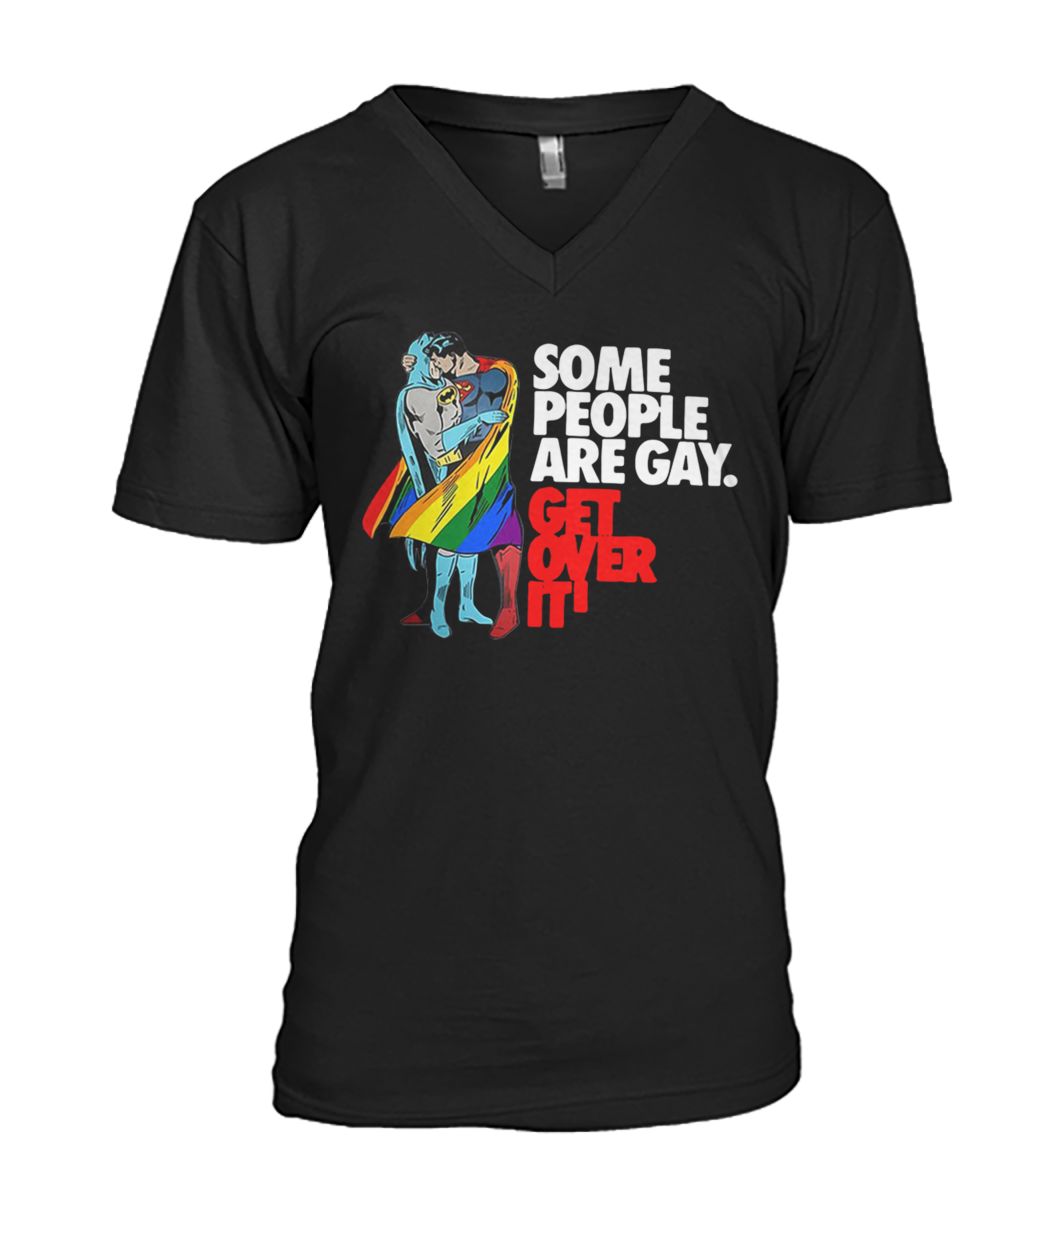 LGBT superman and batman kiss some people are gay get over it mens v-neck